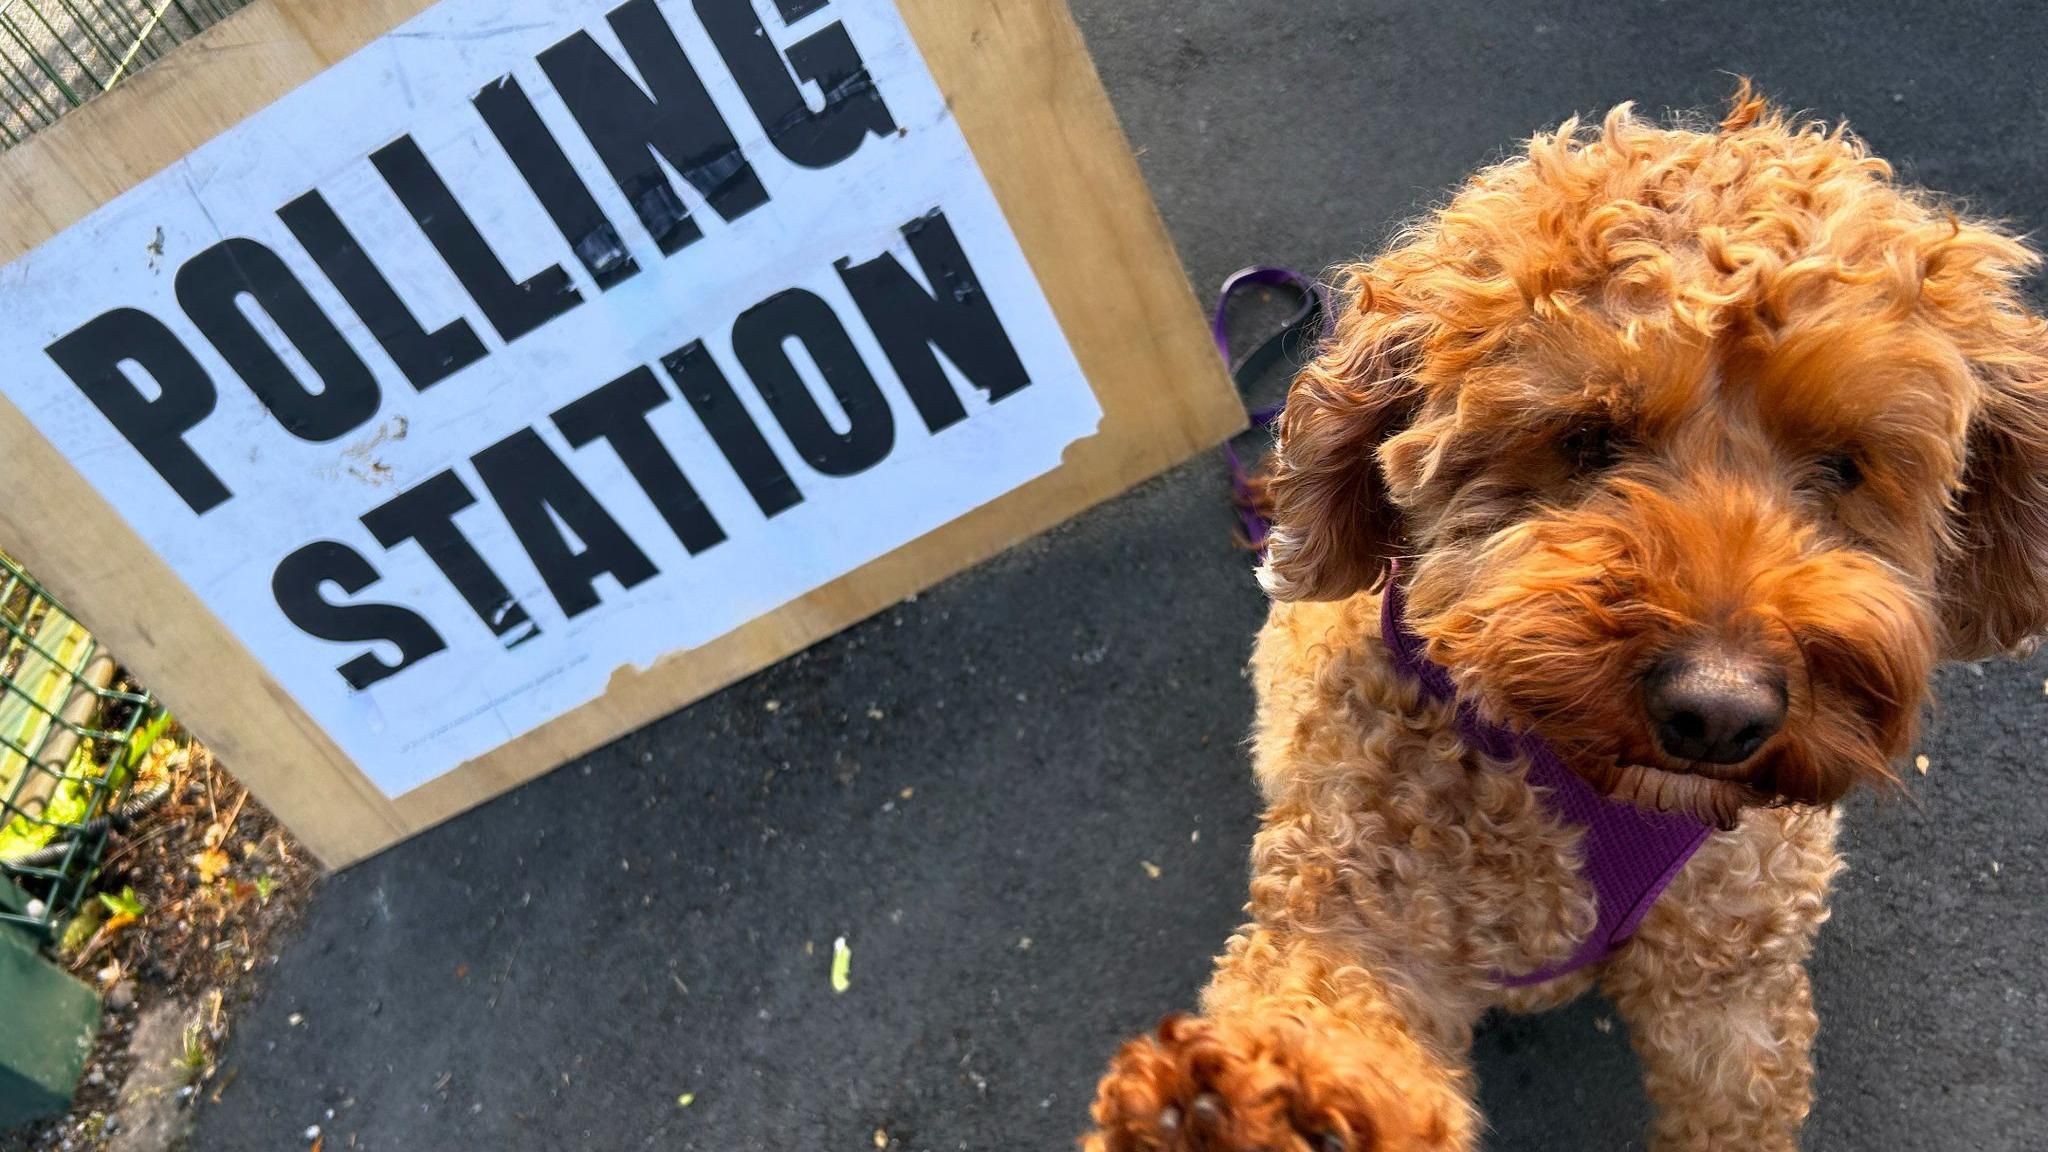 Mavis the cockapoo raises a paw in front of a polling station.